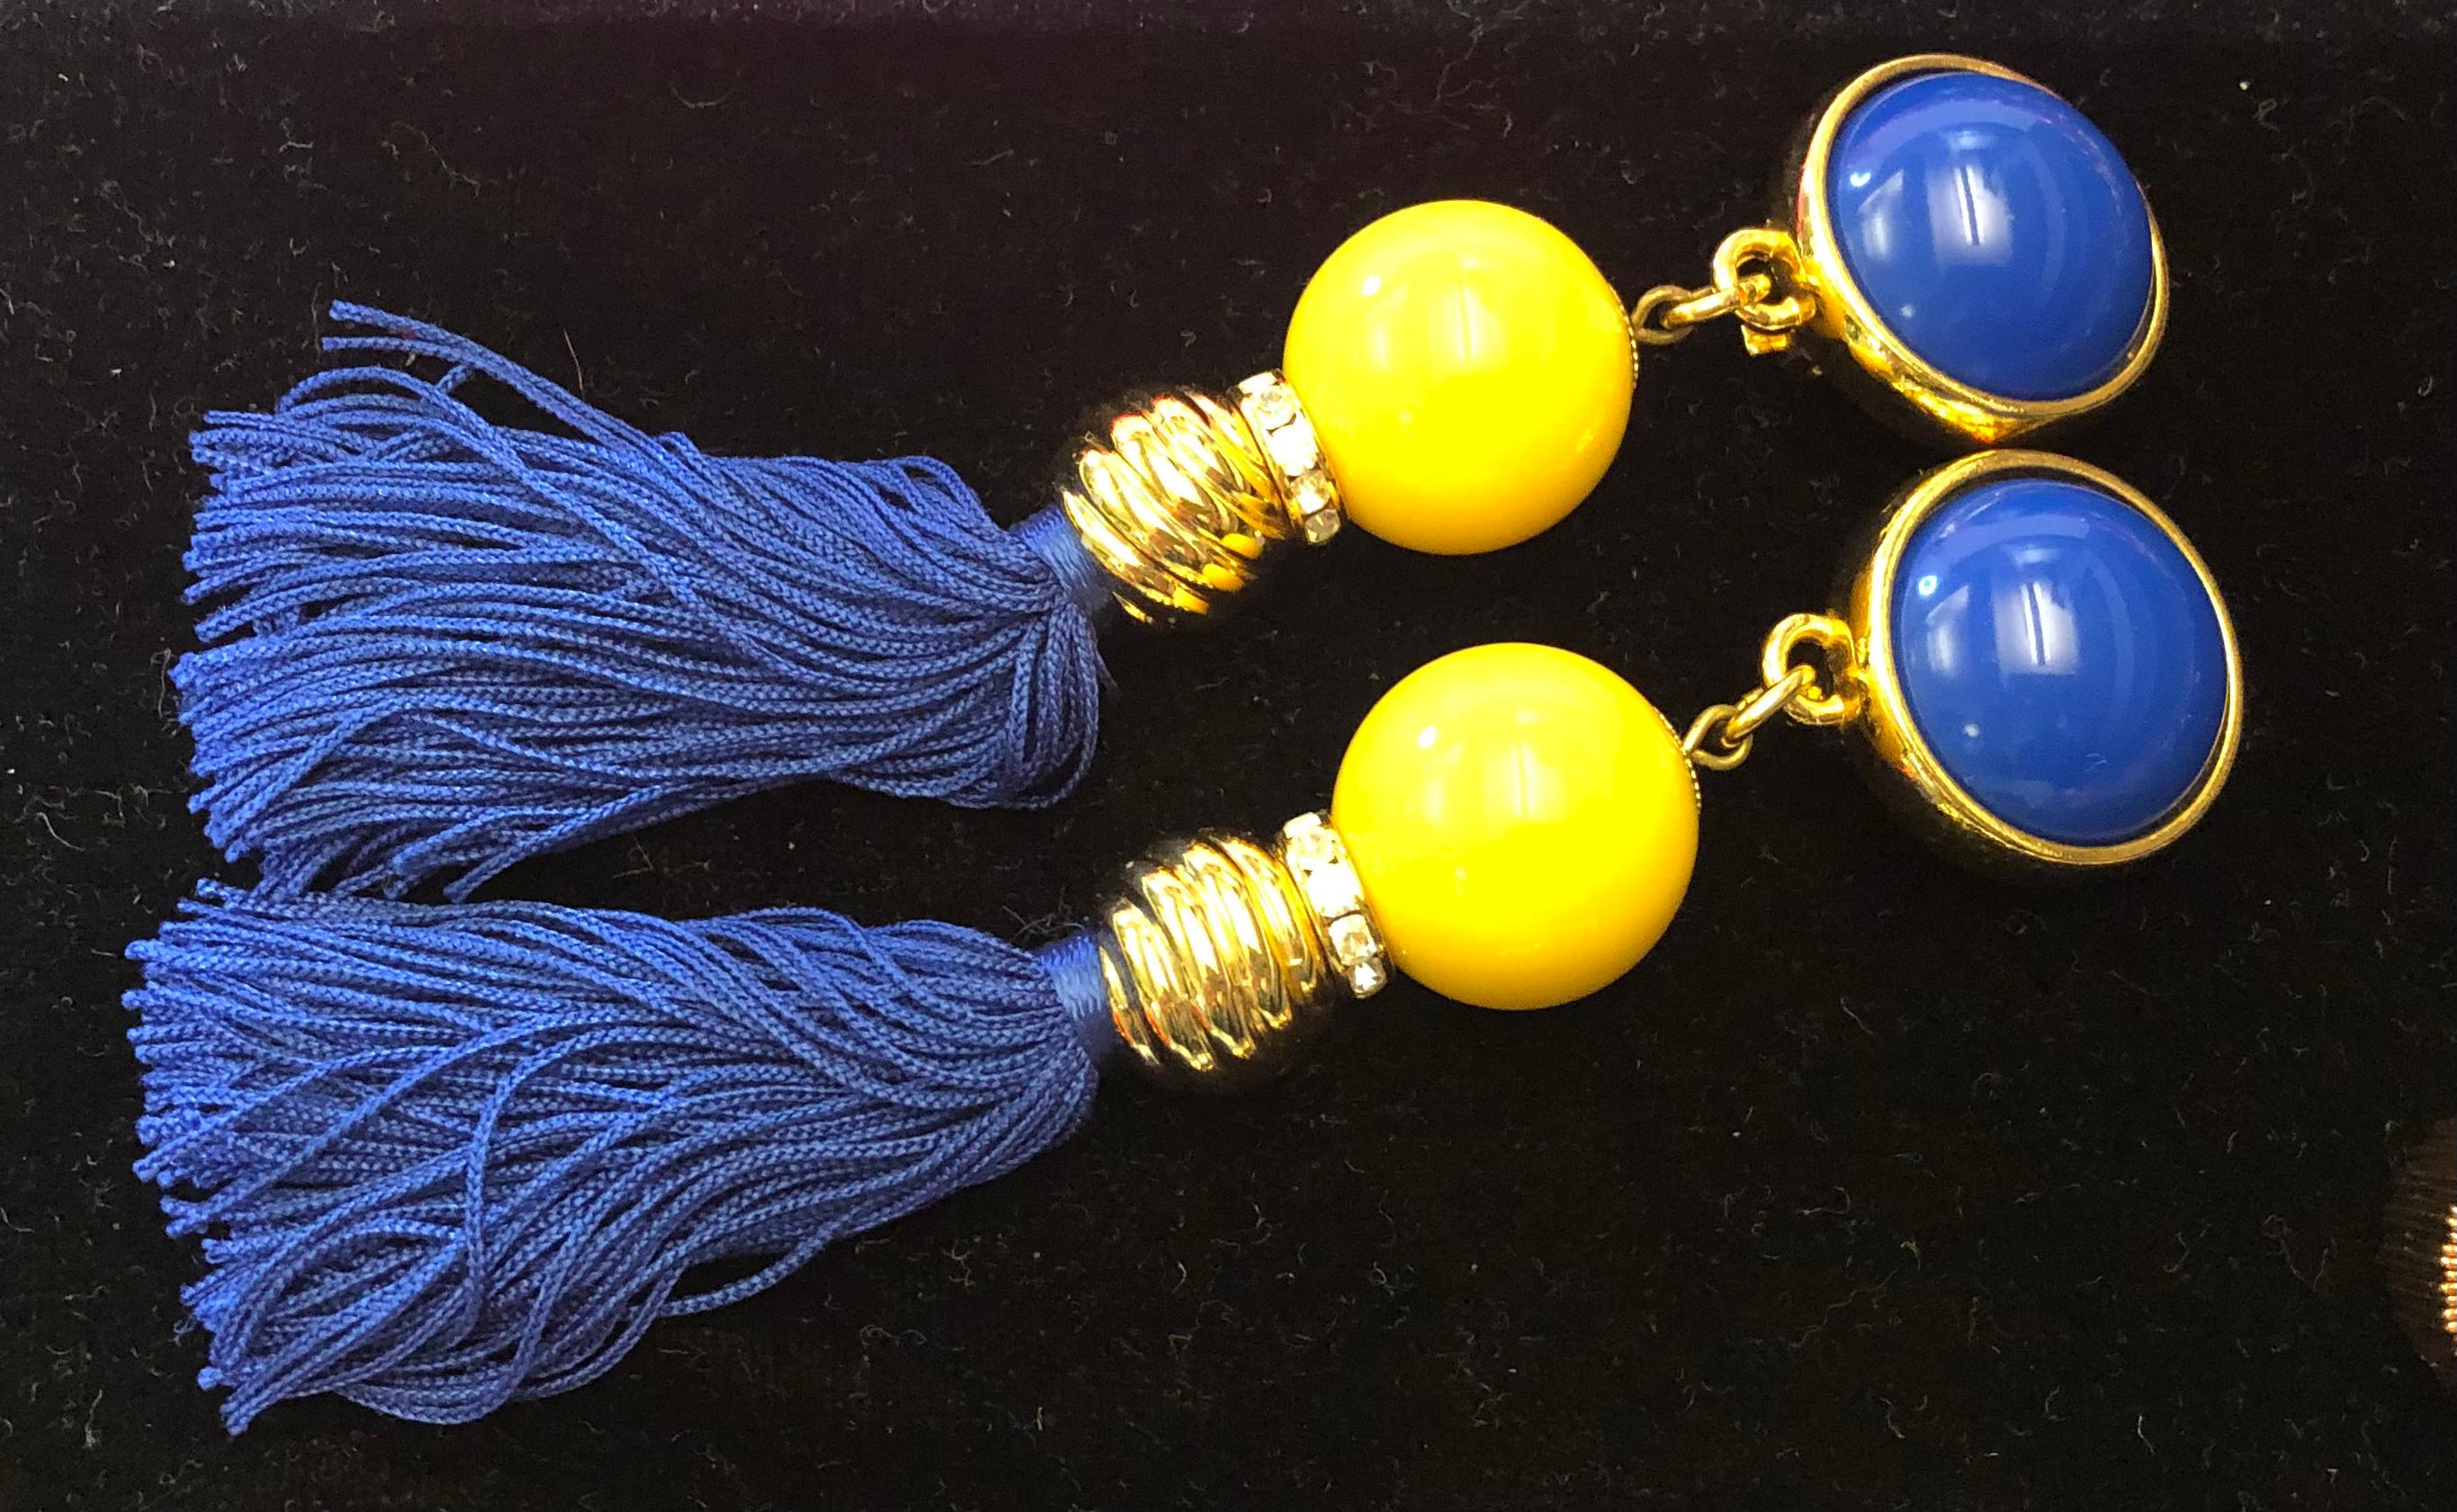 blue and yellow earrings